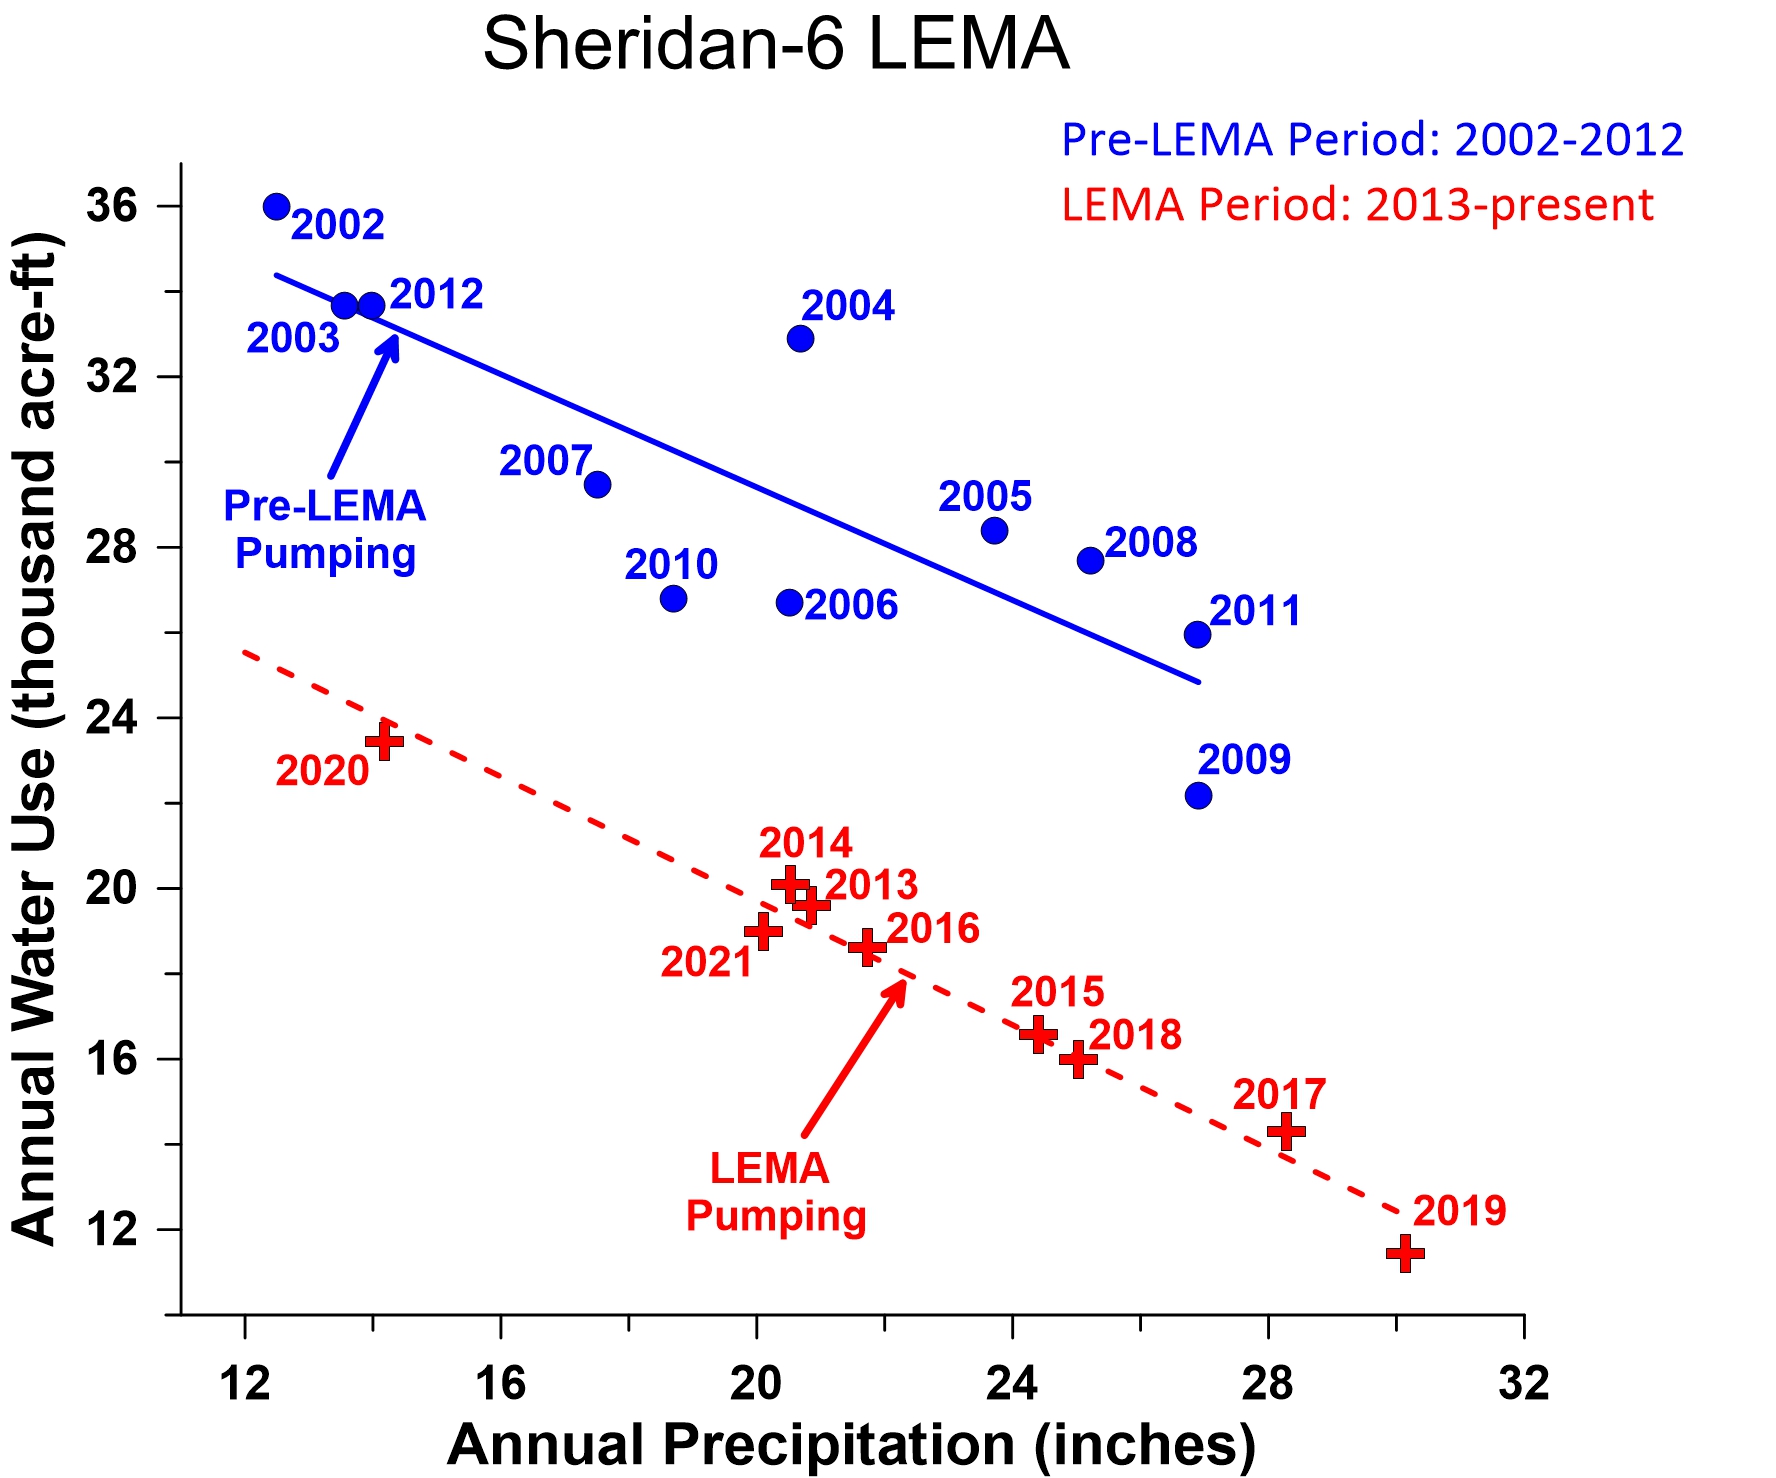 Figure 9. Water use (groundwater pumping) versus precipitation plot illustrating the pumping reductions achieved in the Sheridan-6 LEMA.